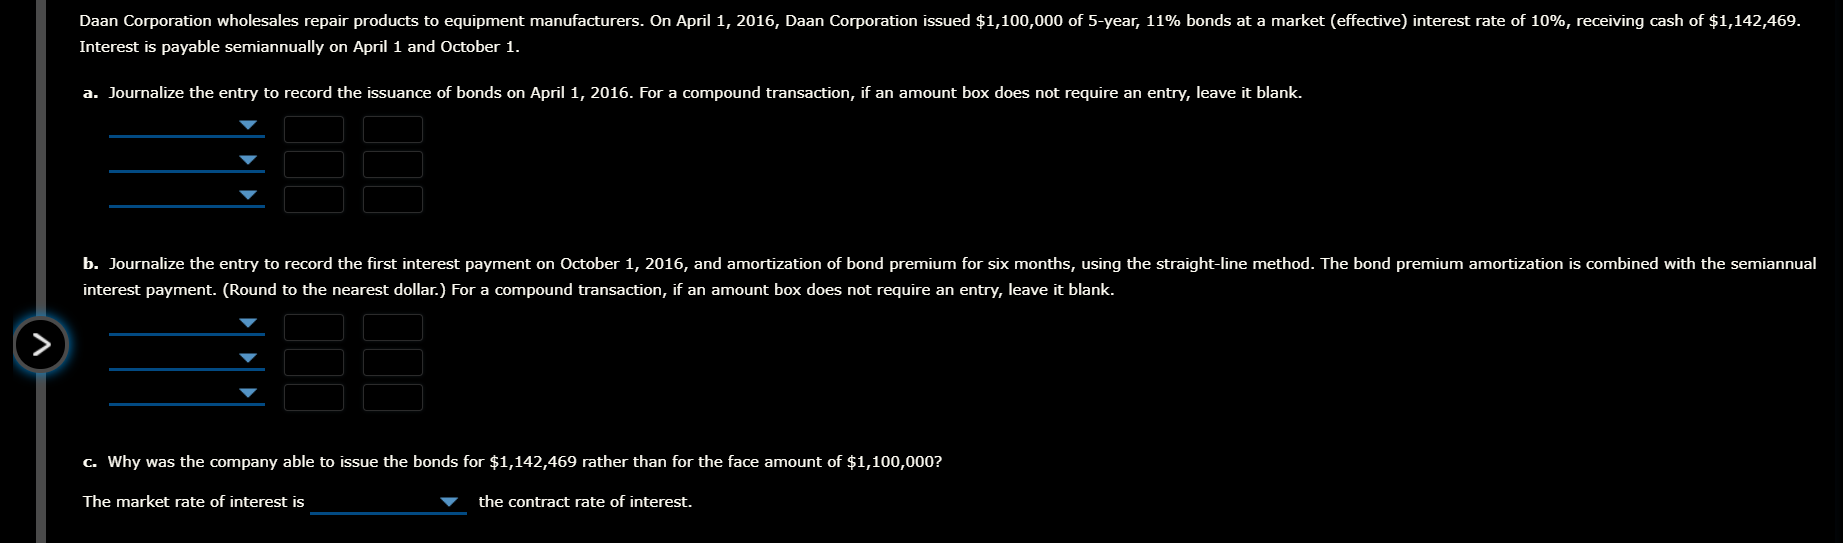 Daan Corporation wholesales repair products to equipment manufacturers. On April 1, 2016, Daan Corporation issued $1,100,000 of 5-year, 11% bonds at a market (effective) interest rate of 10%, receiving cash of $1,142,469.
Interest is payable semiannually on April 1 and October 1.
a. Journalize the entry to record the issuance of bonds on April 1, 2016. For a compound transaction, if an amount box does not require an entry, leave it blank.
b. Journalize the entry to record the first interest payment on October 1, 2016, and amortization of bond premium for six months, using the straight-line method. The bond premium amortization is combined with the semiannual
interest payment. (Round to the nearest dollar.) For a compound transaction, if an amount box does not require an entry, leave it blank.
C. Why was the company able to issue the bonds for $1,142,469 rather than for the face amount of $1,100,000?
The market rate of interest is
the contract rate of interest.
